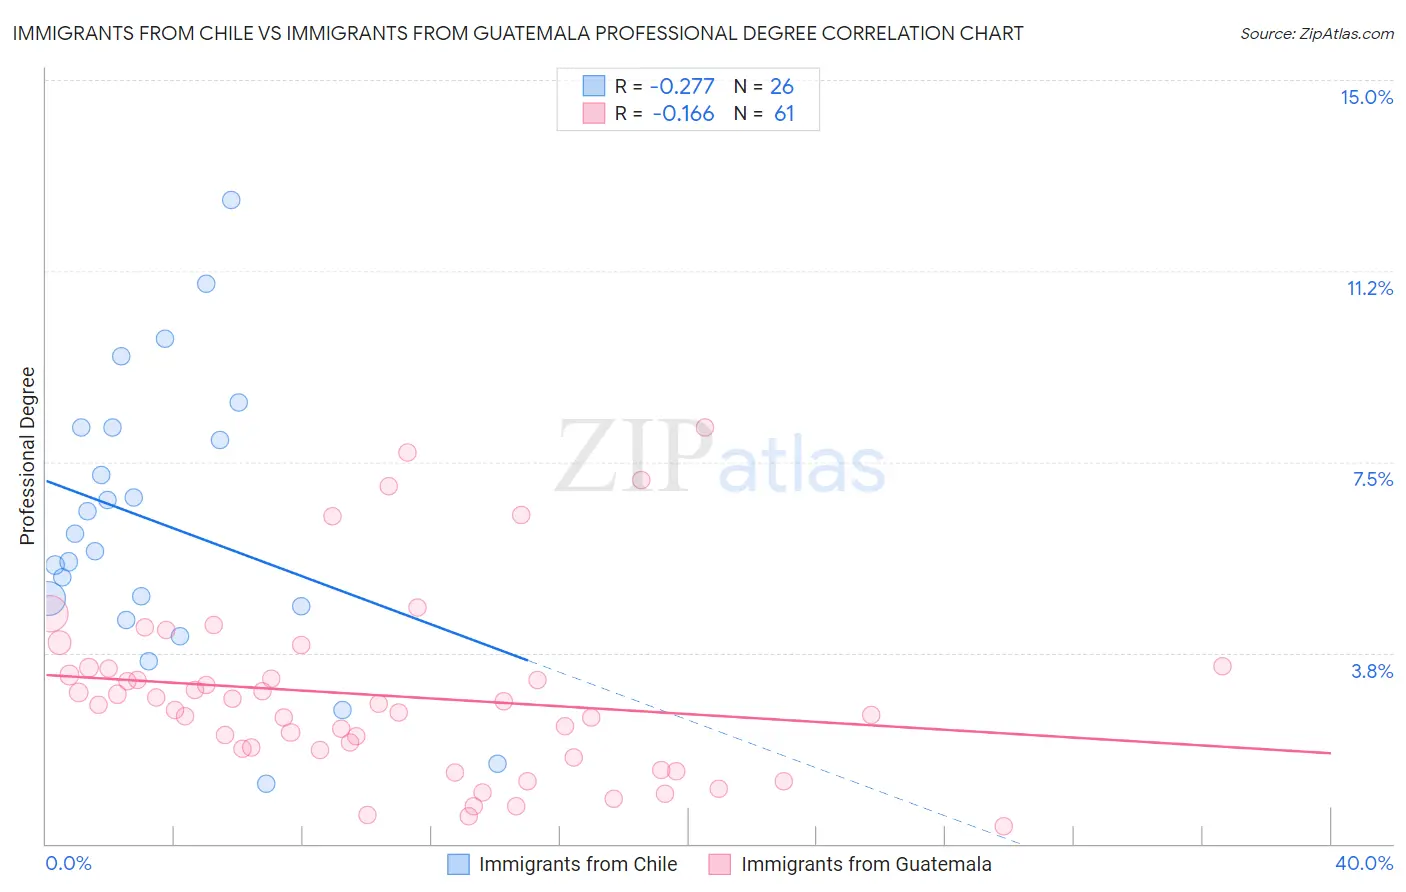 Immigrants from Chile vs Immigrants from Guatemala Professional Degree